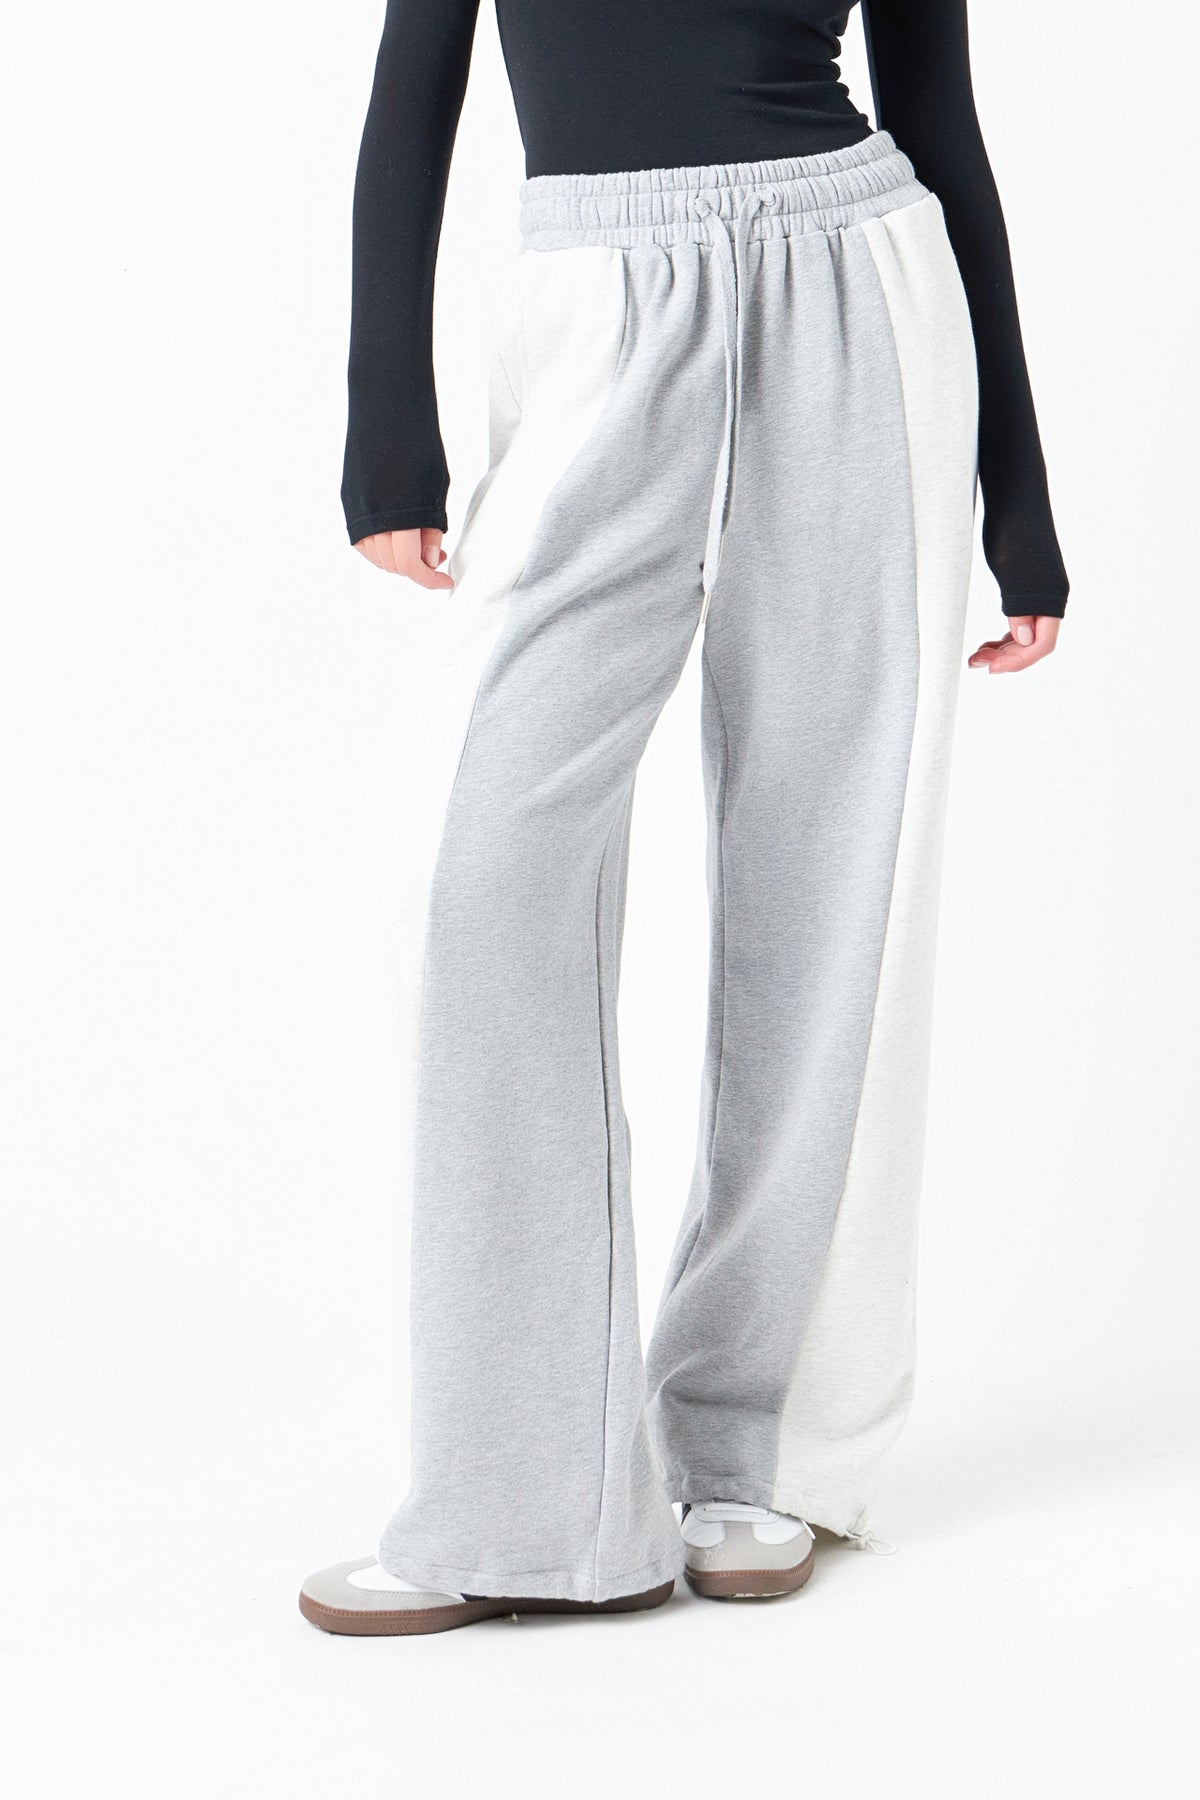 GREY LAB - Colorblock Loungewear Pants - PANTS available at Objectrare